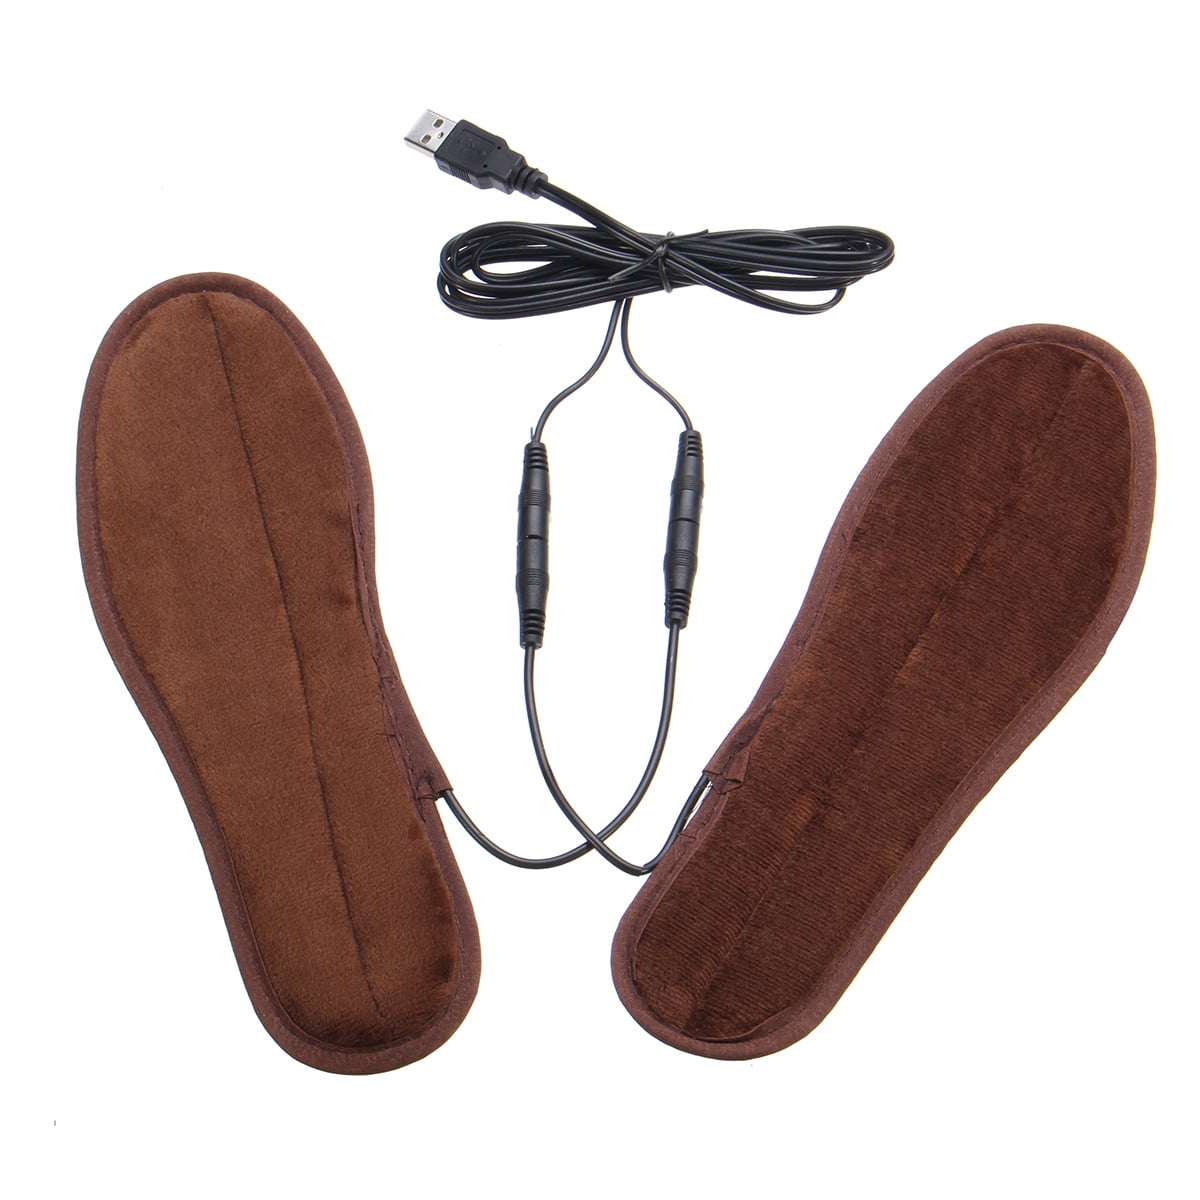 Rechargeable Heated Foot Warmers Feet Heater Washable Cut-to-Fit Shoes Insoles 